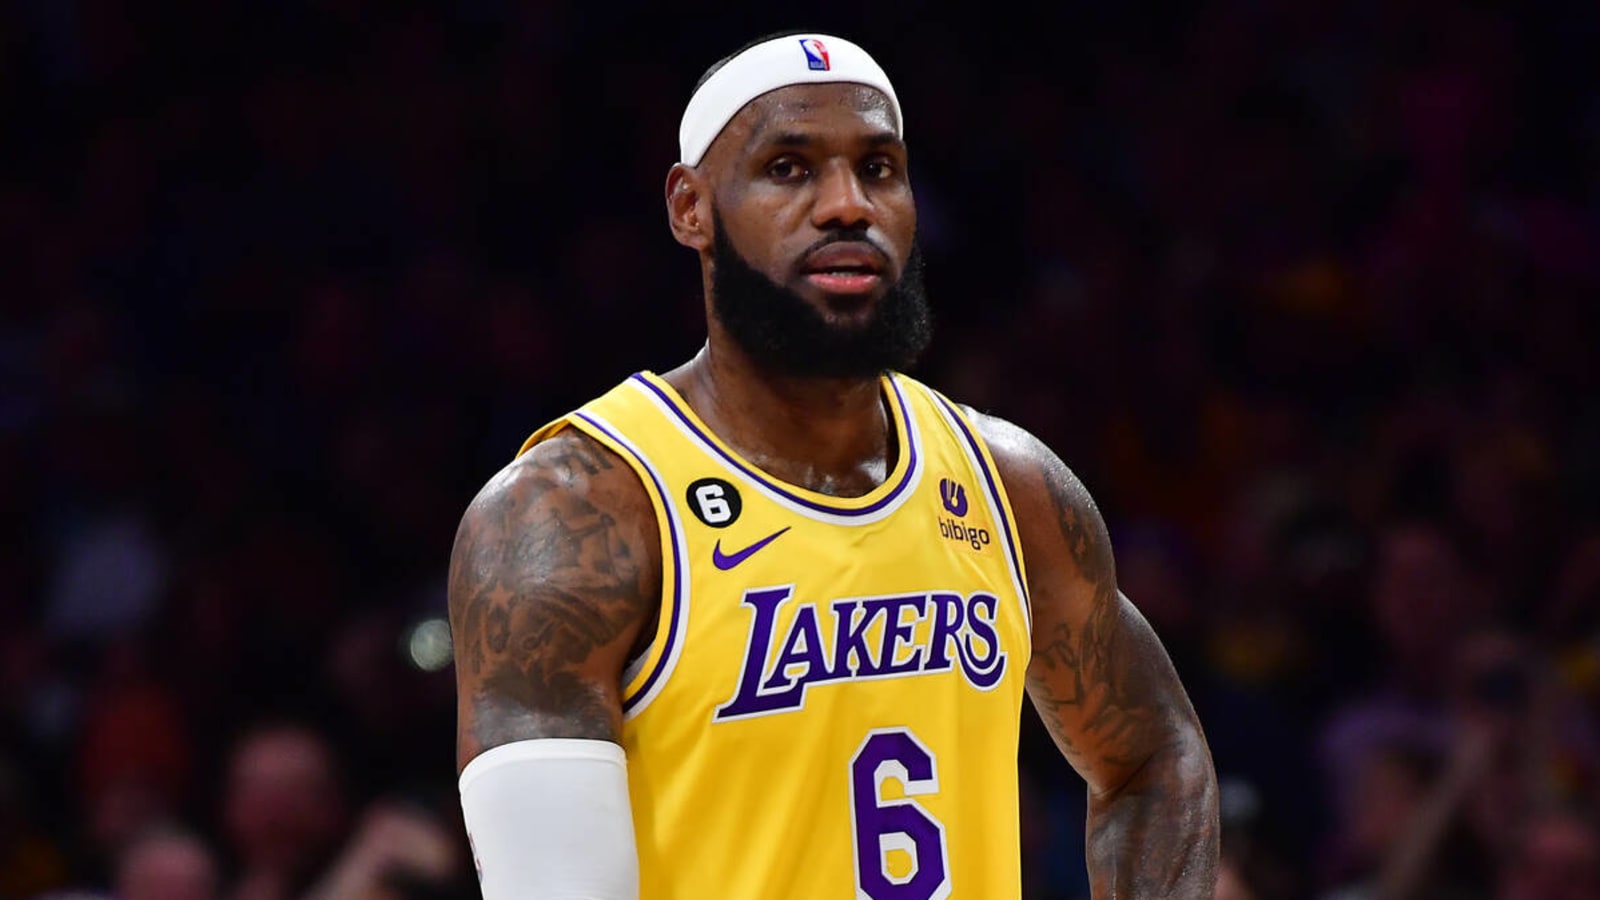 LeBron James reportedly 'severely struggling' with injury